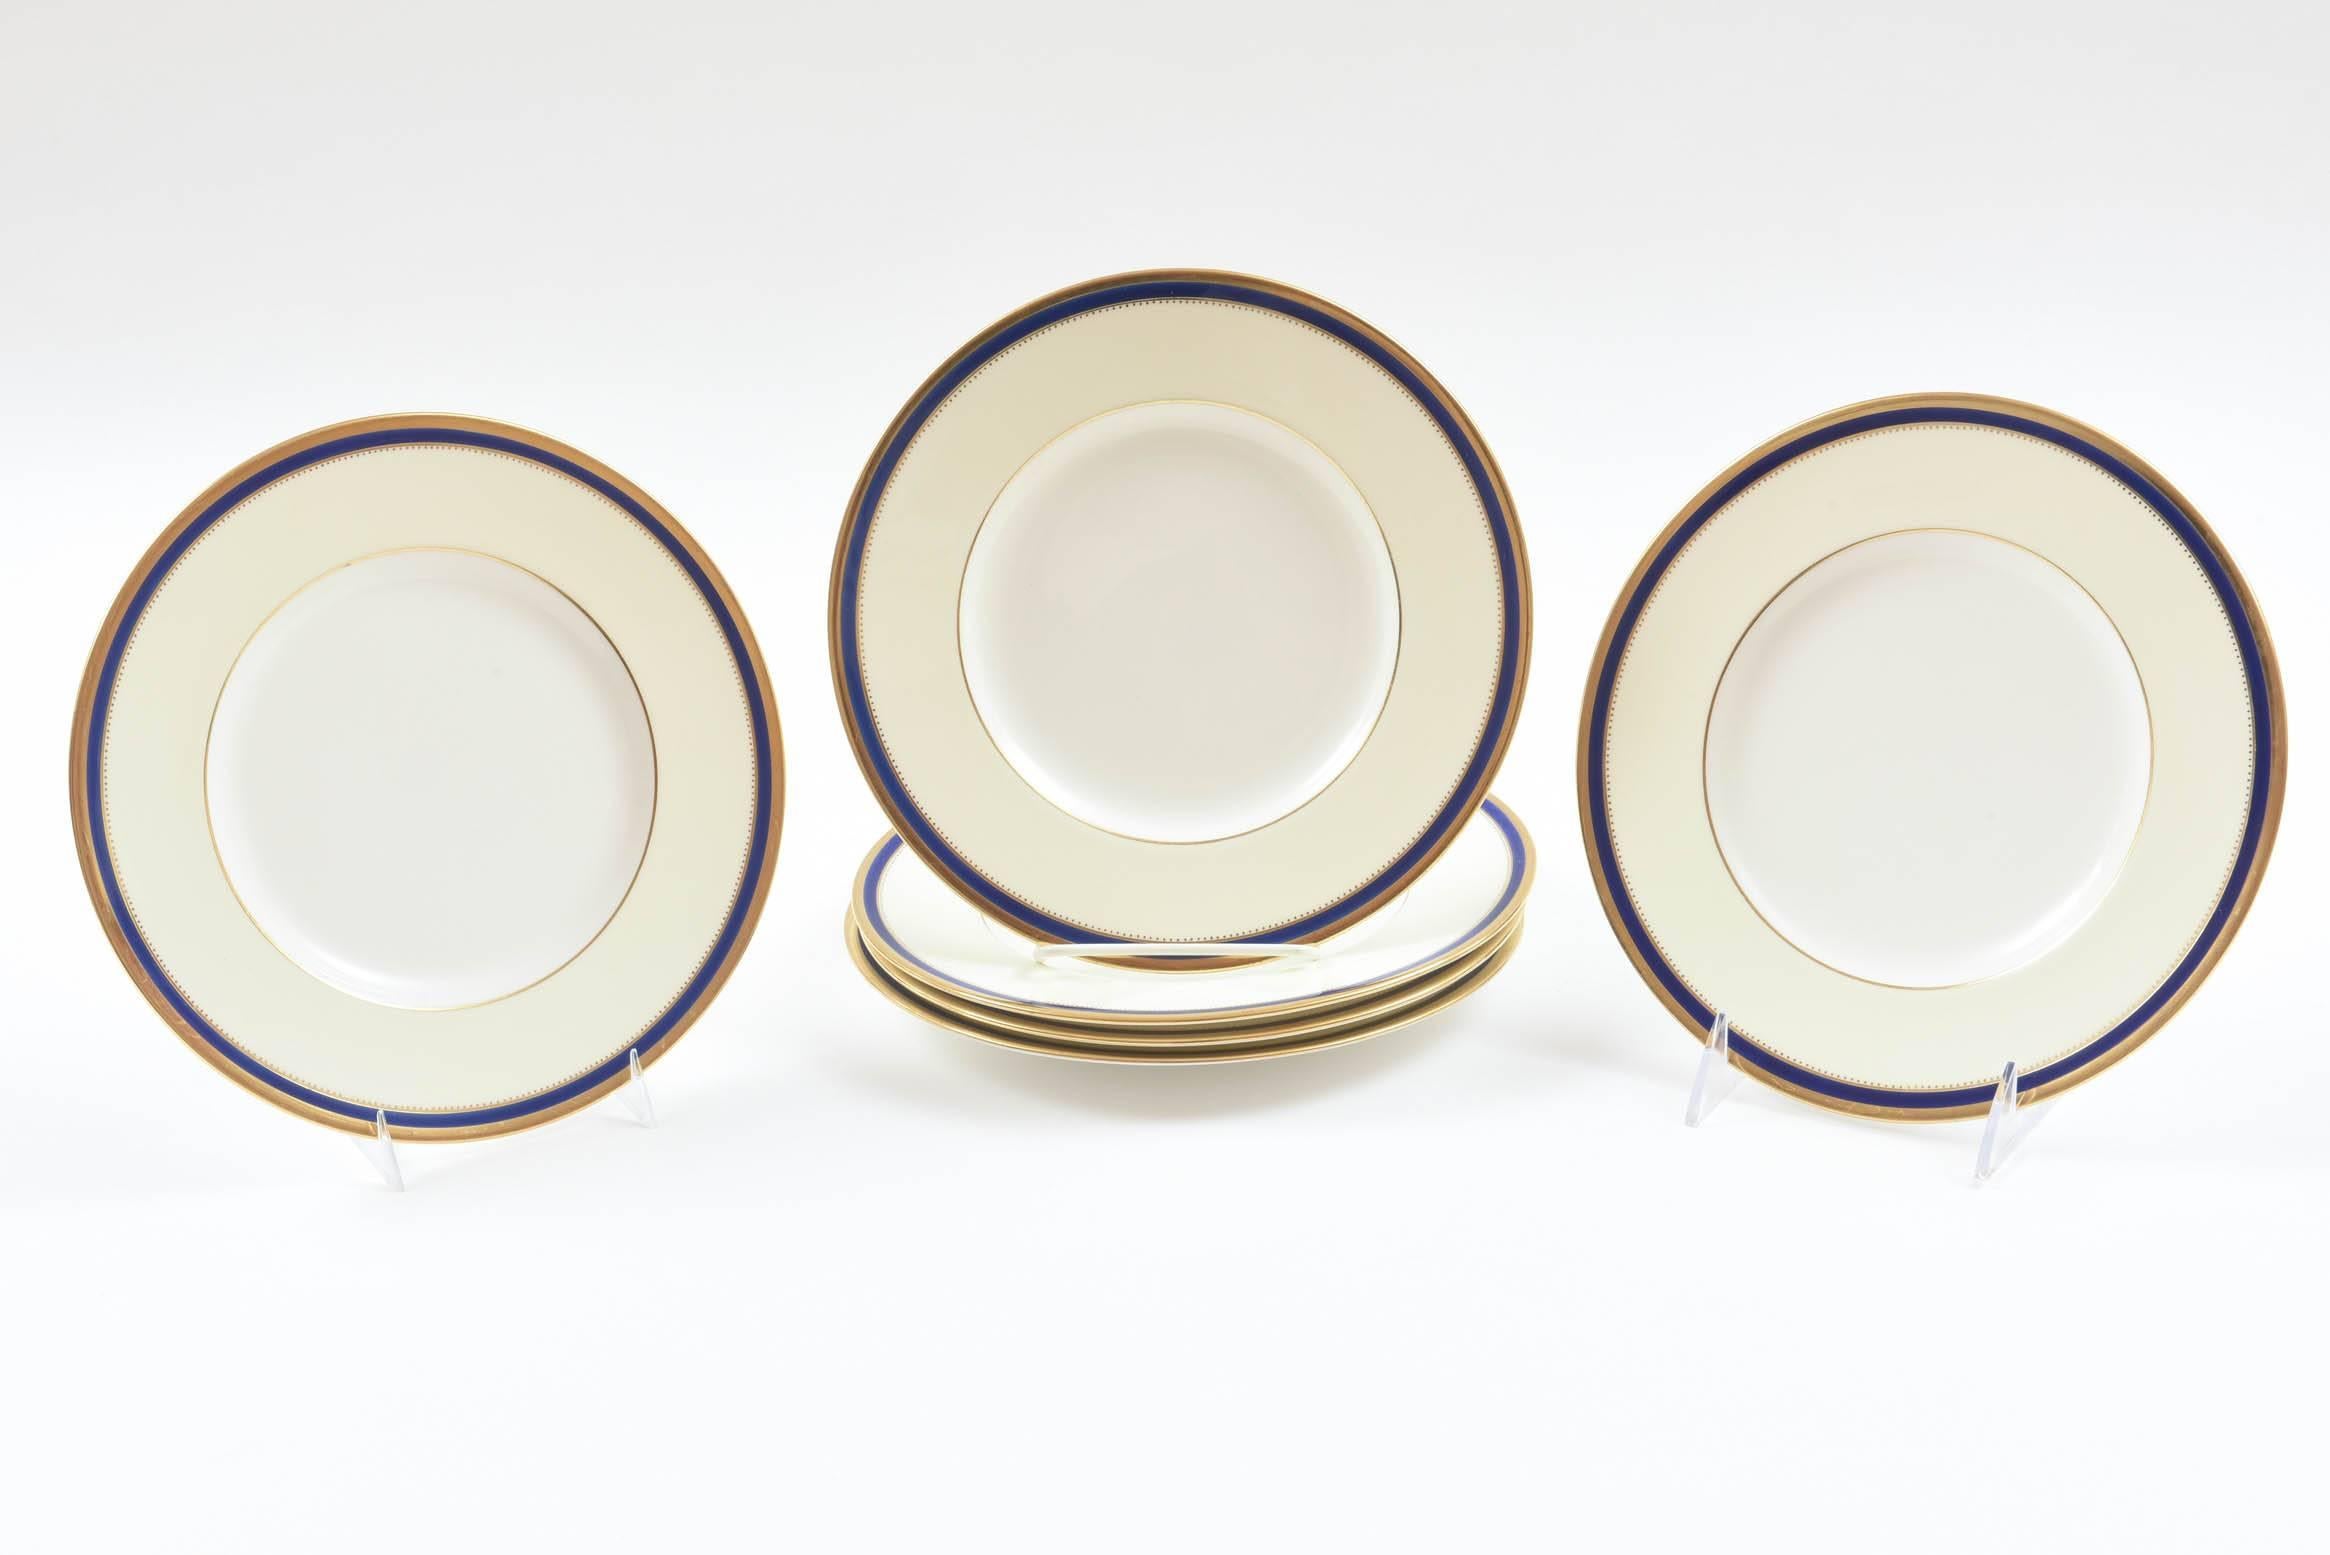 Six Minton England Cobalt Blue and Gold Salad and or Dessert Plates, Antique 1